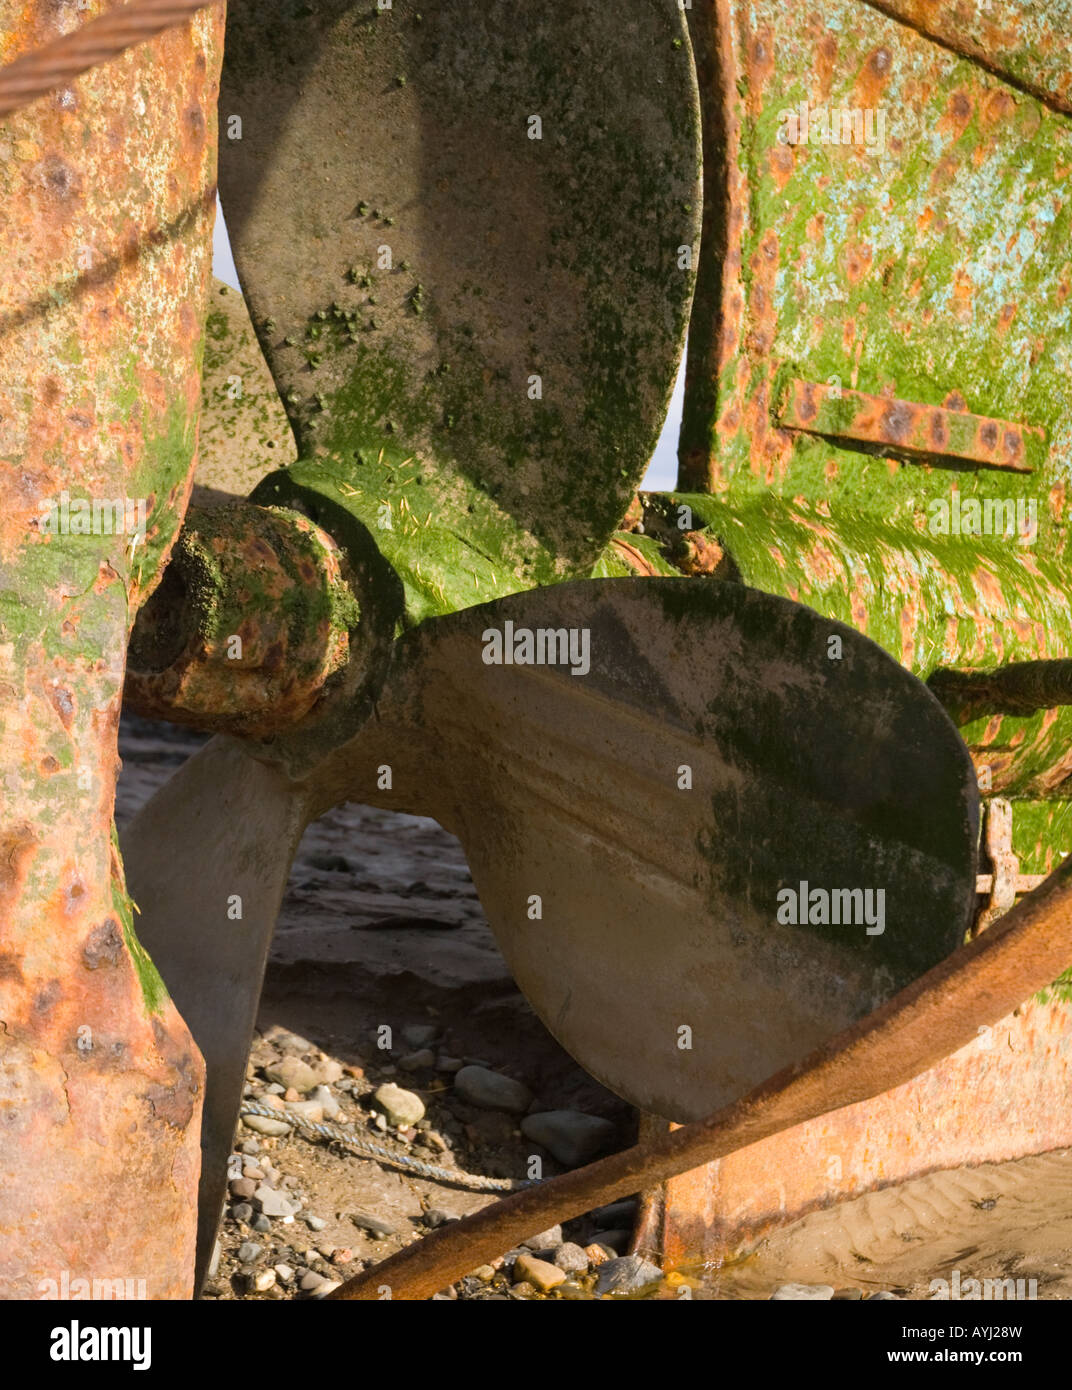 A view of a propeller of a boat Stock Photo